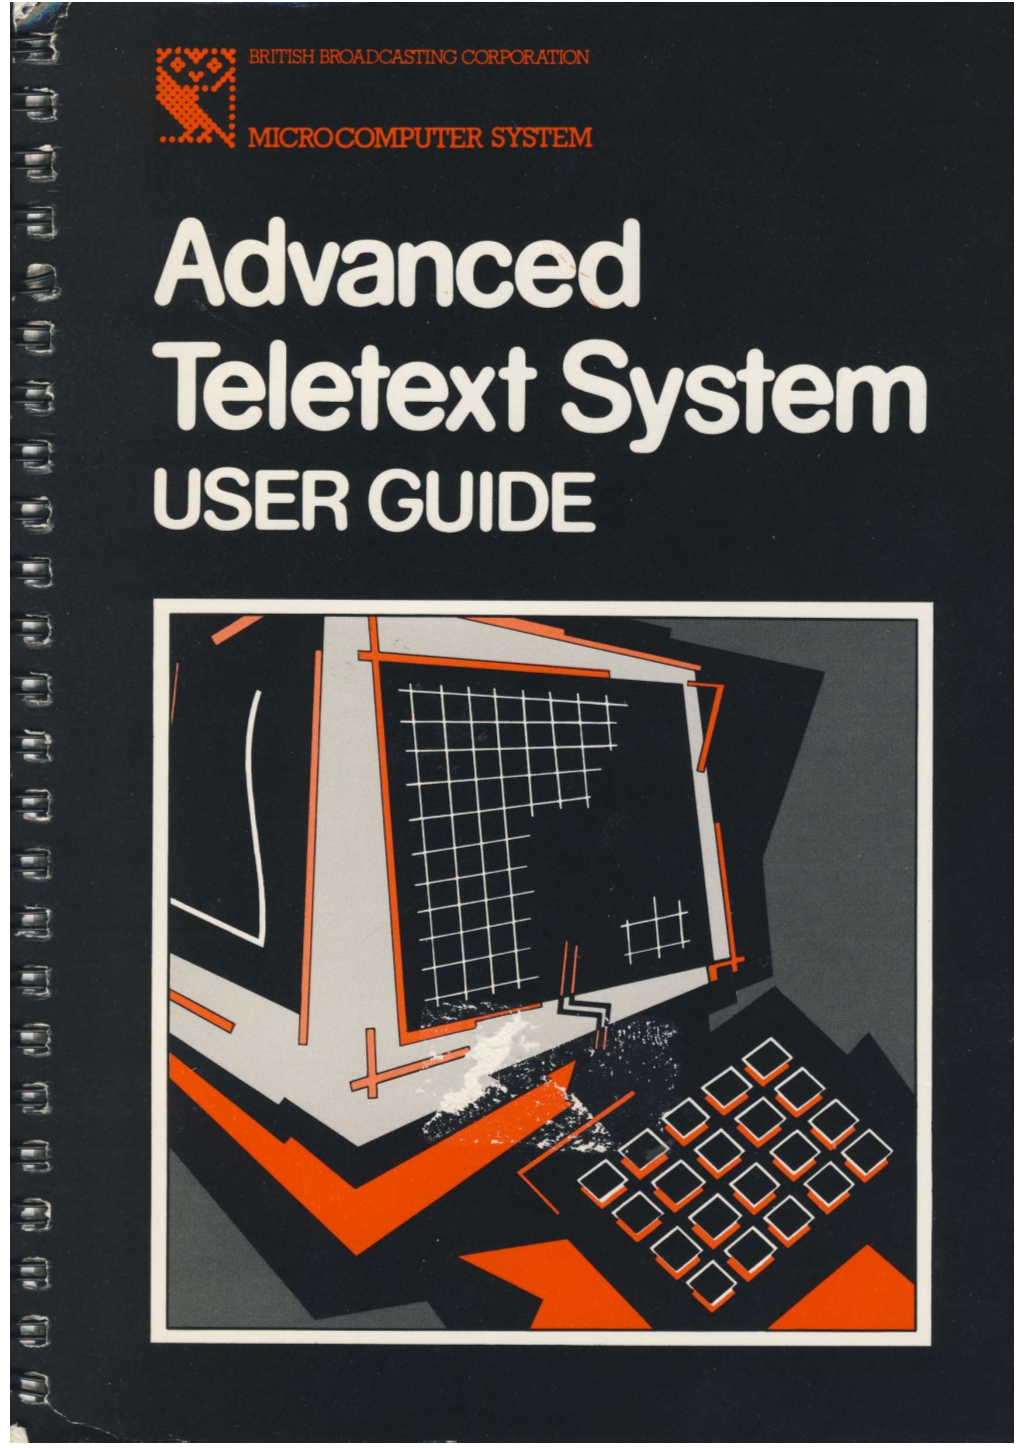 Advanced Teletext System USER GUIDE the Advanced Teletext System User Guide